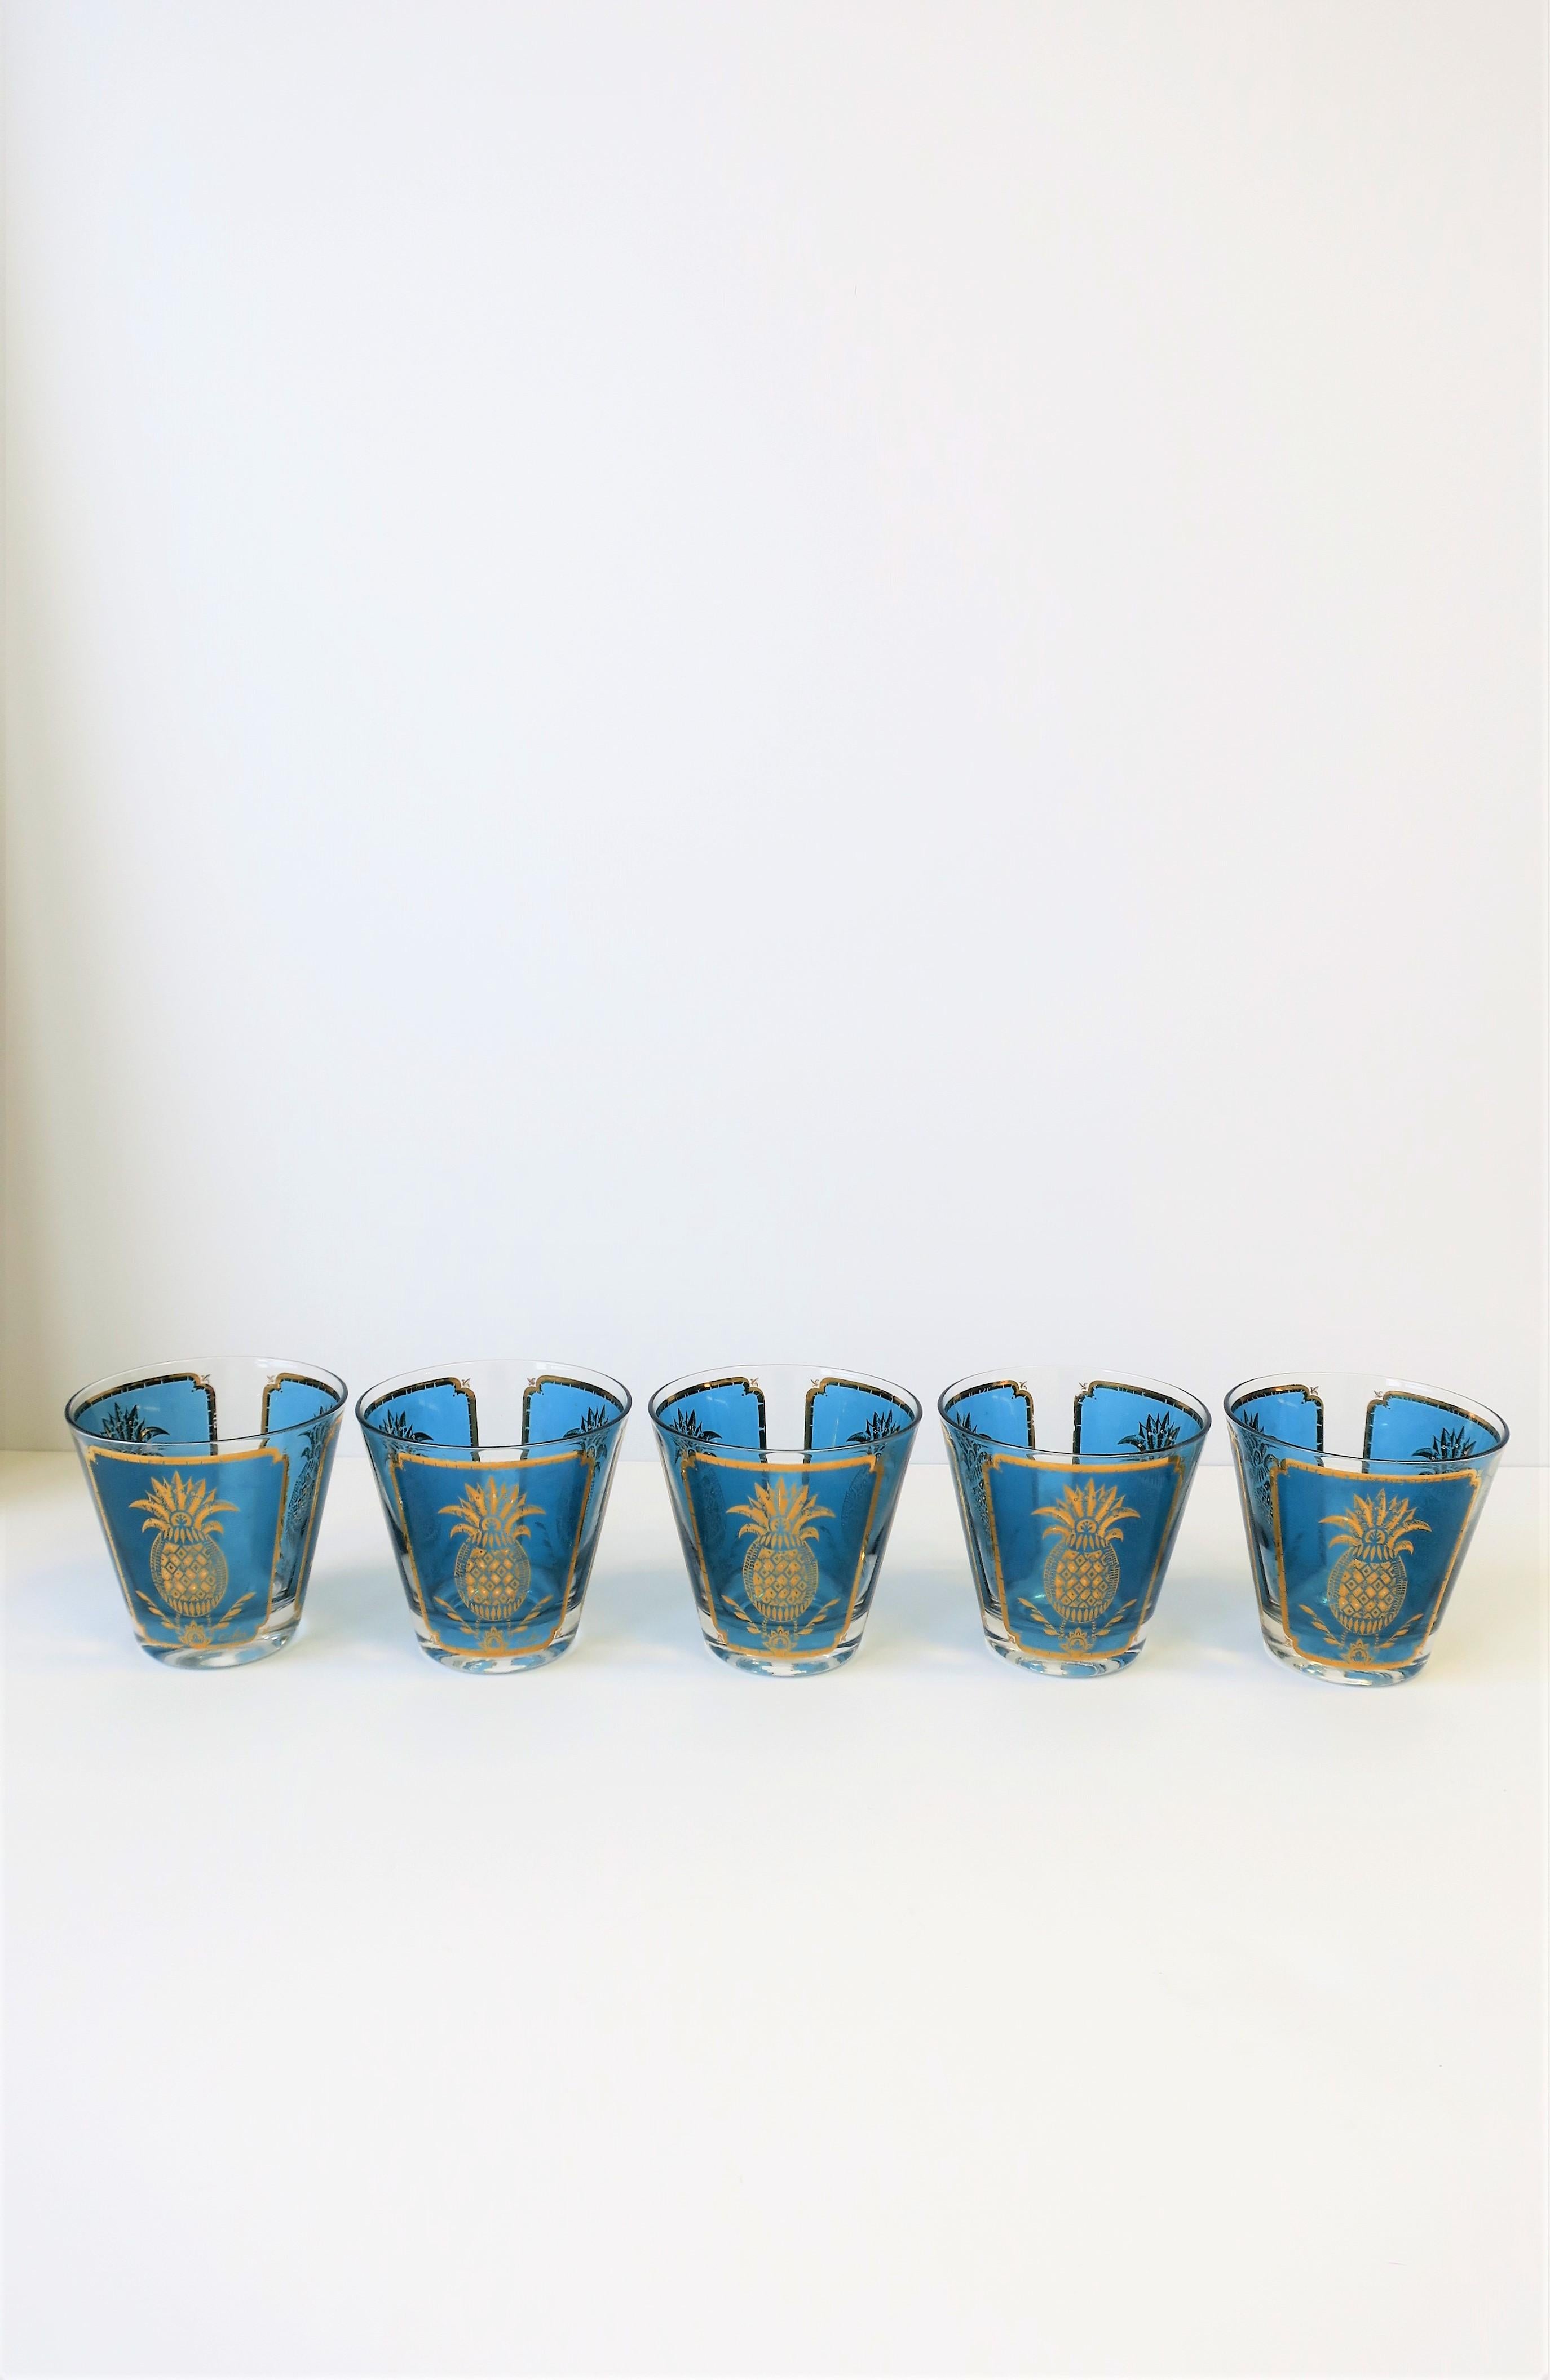 American Midcentury Blue and Gold Rocks Cocktail Glasses with Pineapple Design